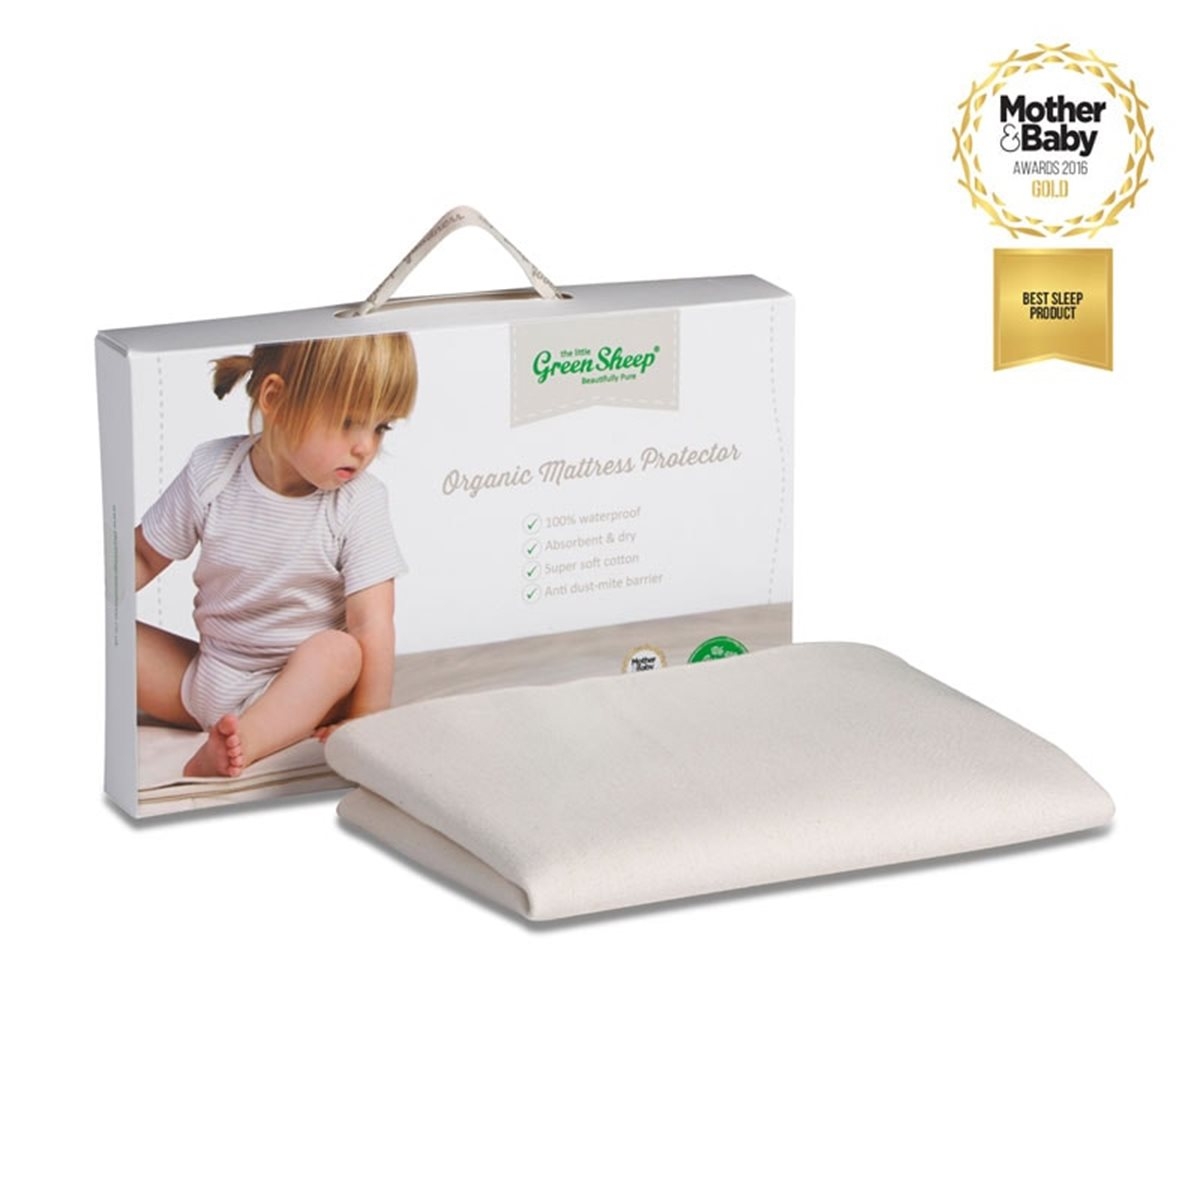 The Little Green Sheep – Organic Mattress Protector Large Crib To Fit Co Sleeper – White – Plastic